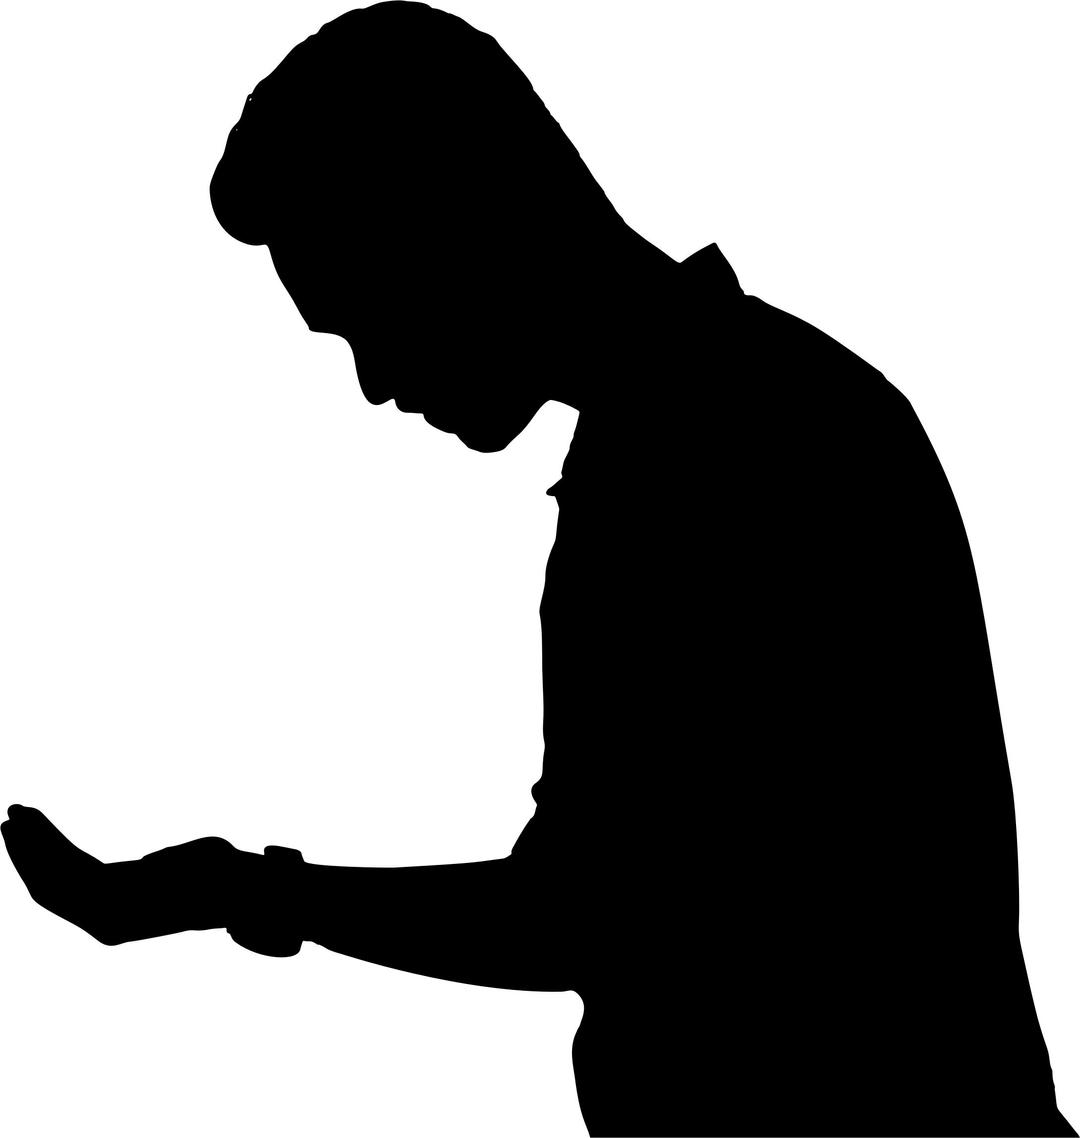 Man Looking At Hand Silhouette png transparent